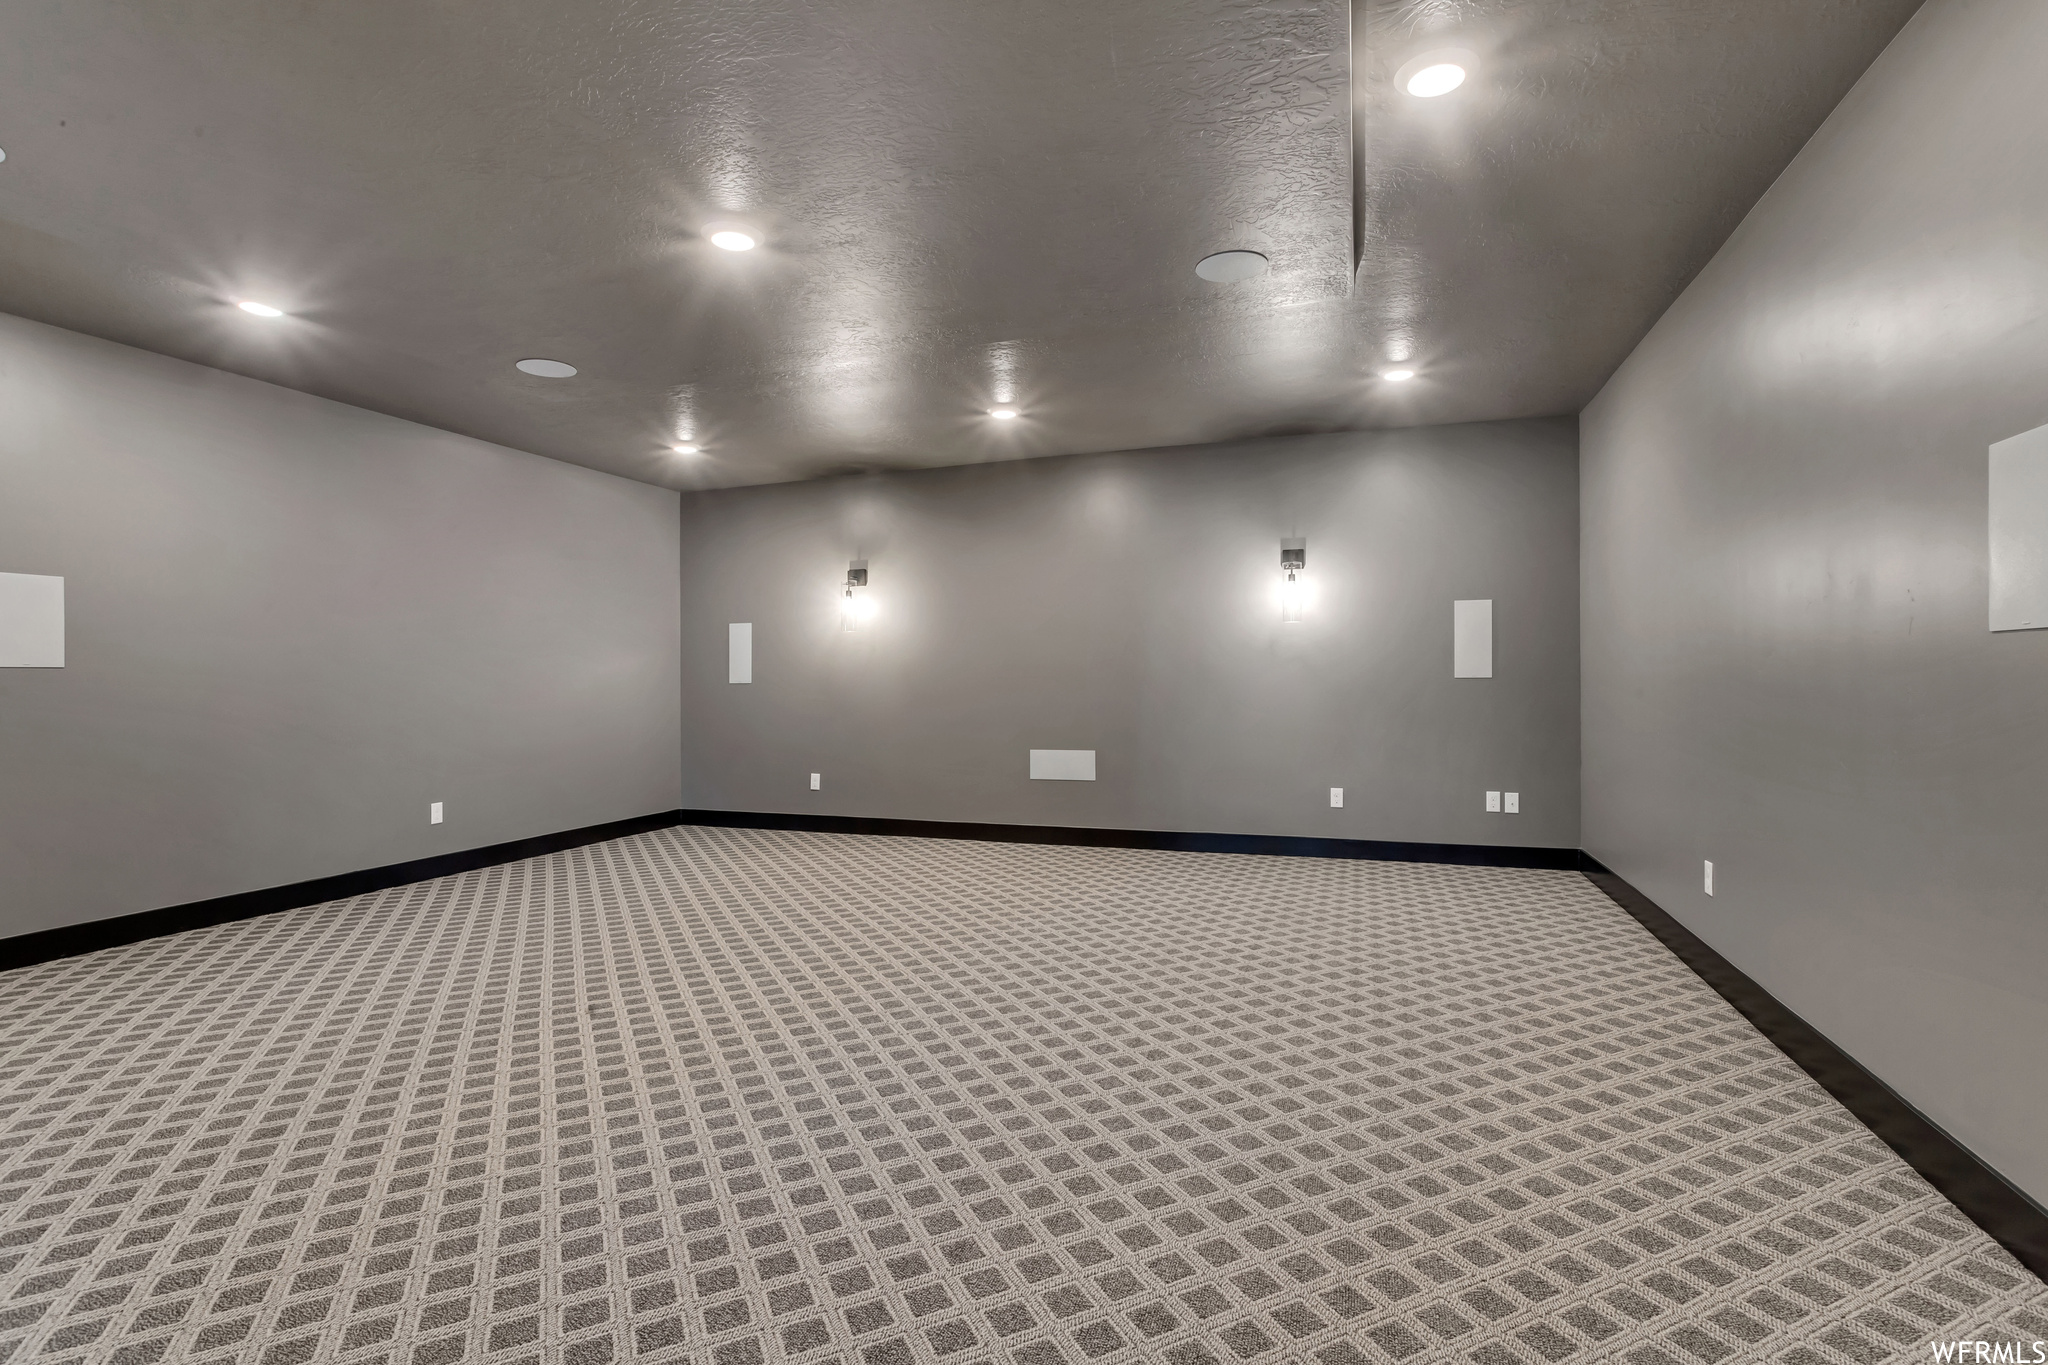 Theater room with owner selected paint and flooring as well as upgraded lighting and sound features